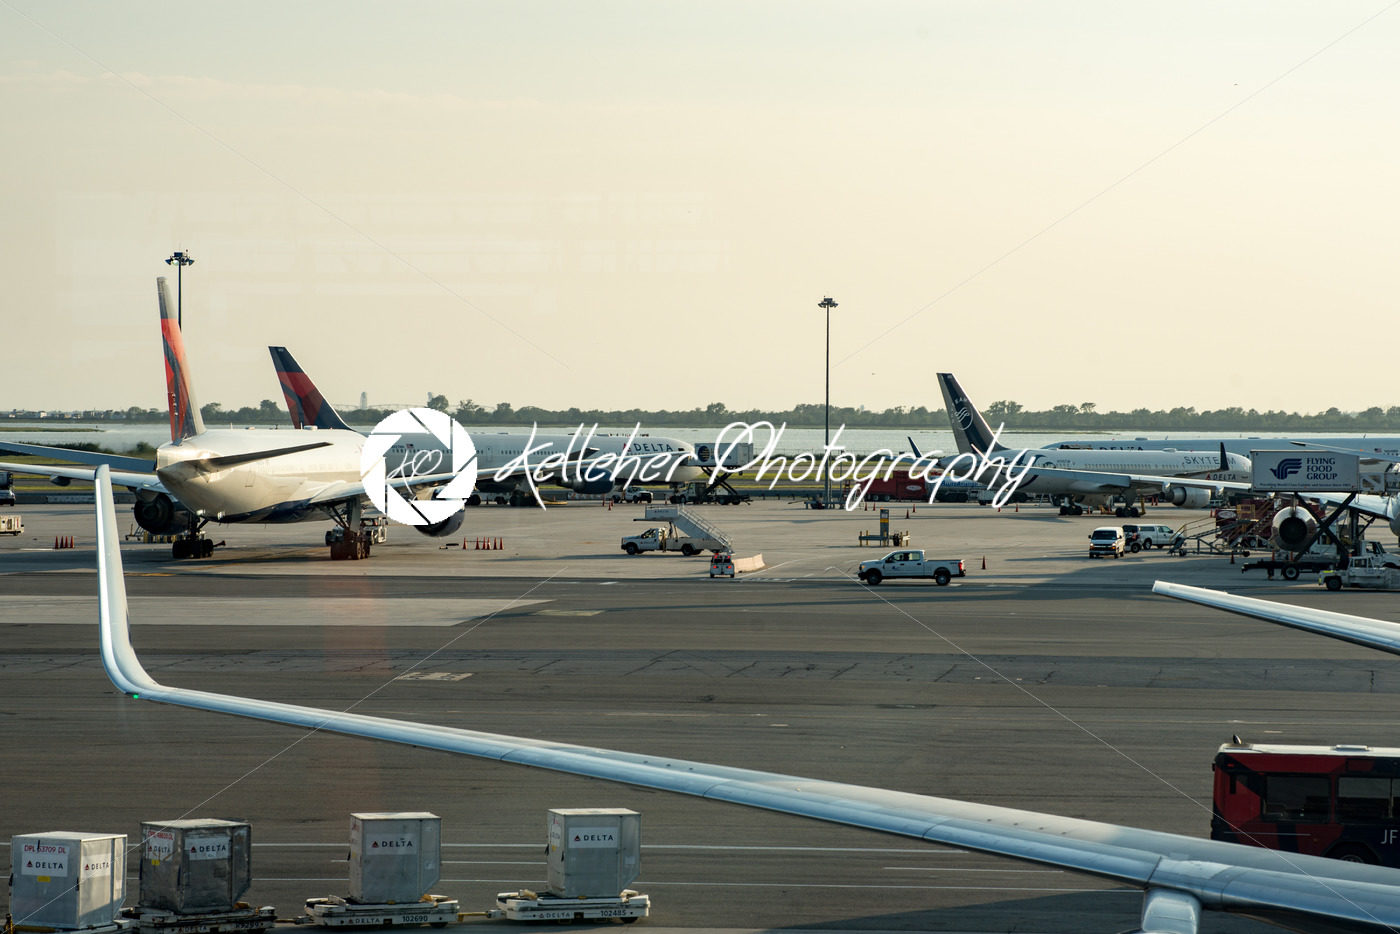 NEW YORK – AUGUST 17, 2017: Delta Airlines plane on tarmac at Terminal 4 at JFK International Airport - Kelleher Photography Store